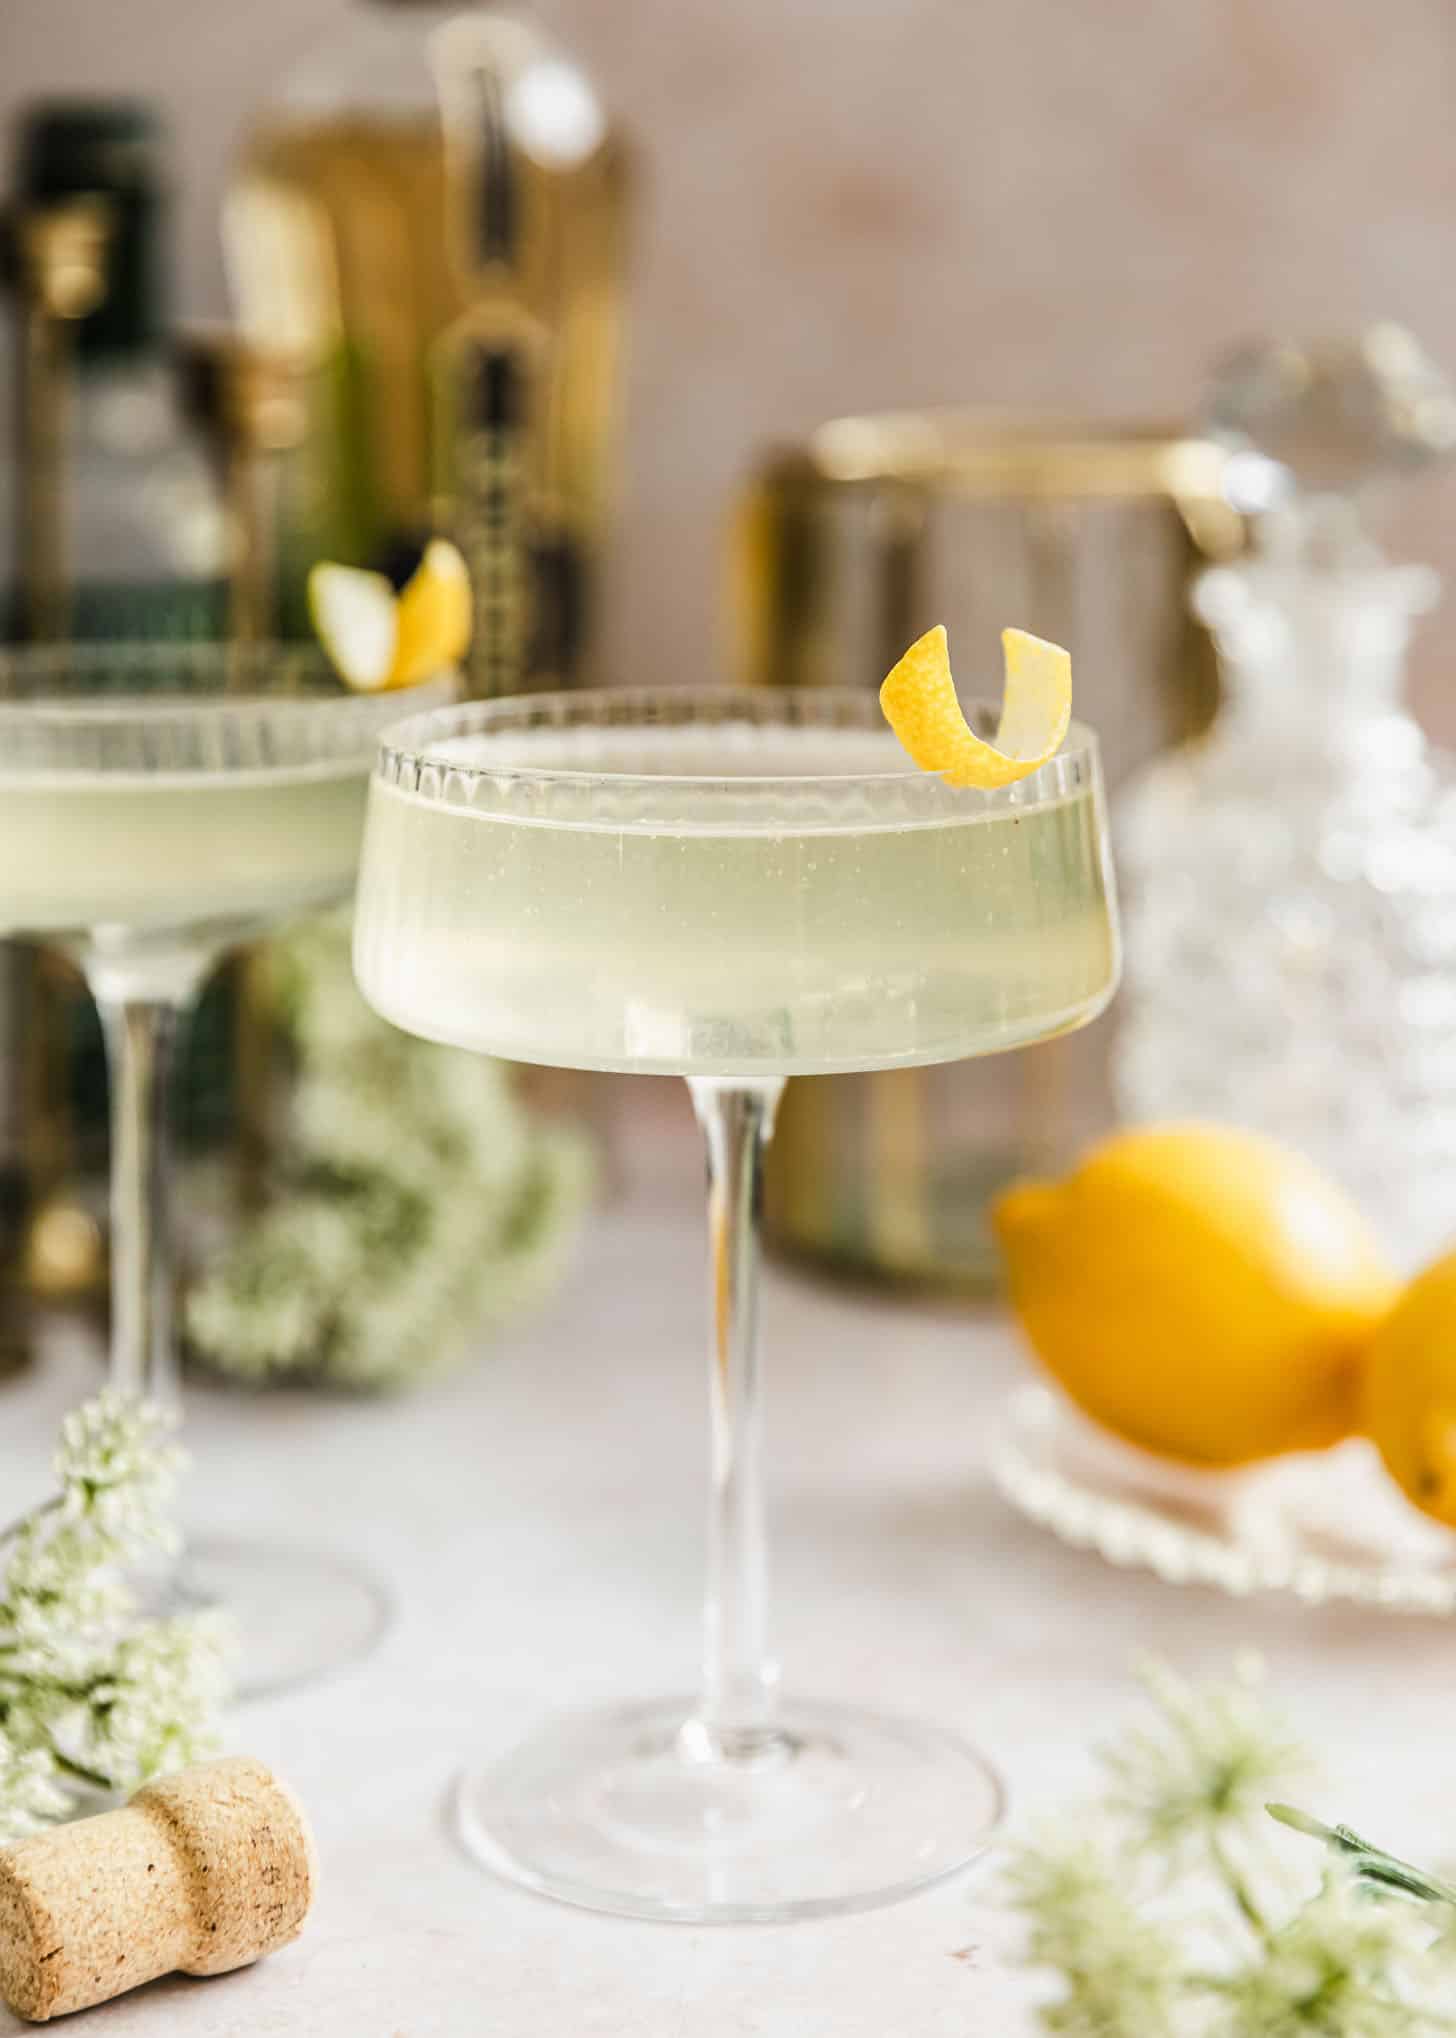 Ideas for a Cocktail Party | Two French 77 cocktails on a beige counter next to white flowers, lemons, and a bottle of elderflower liqueur.